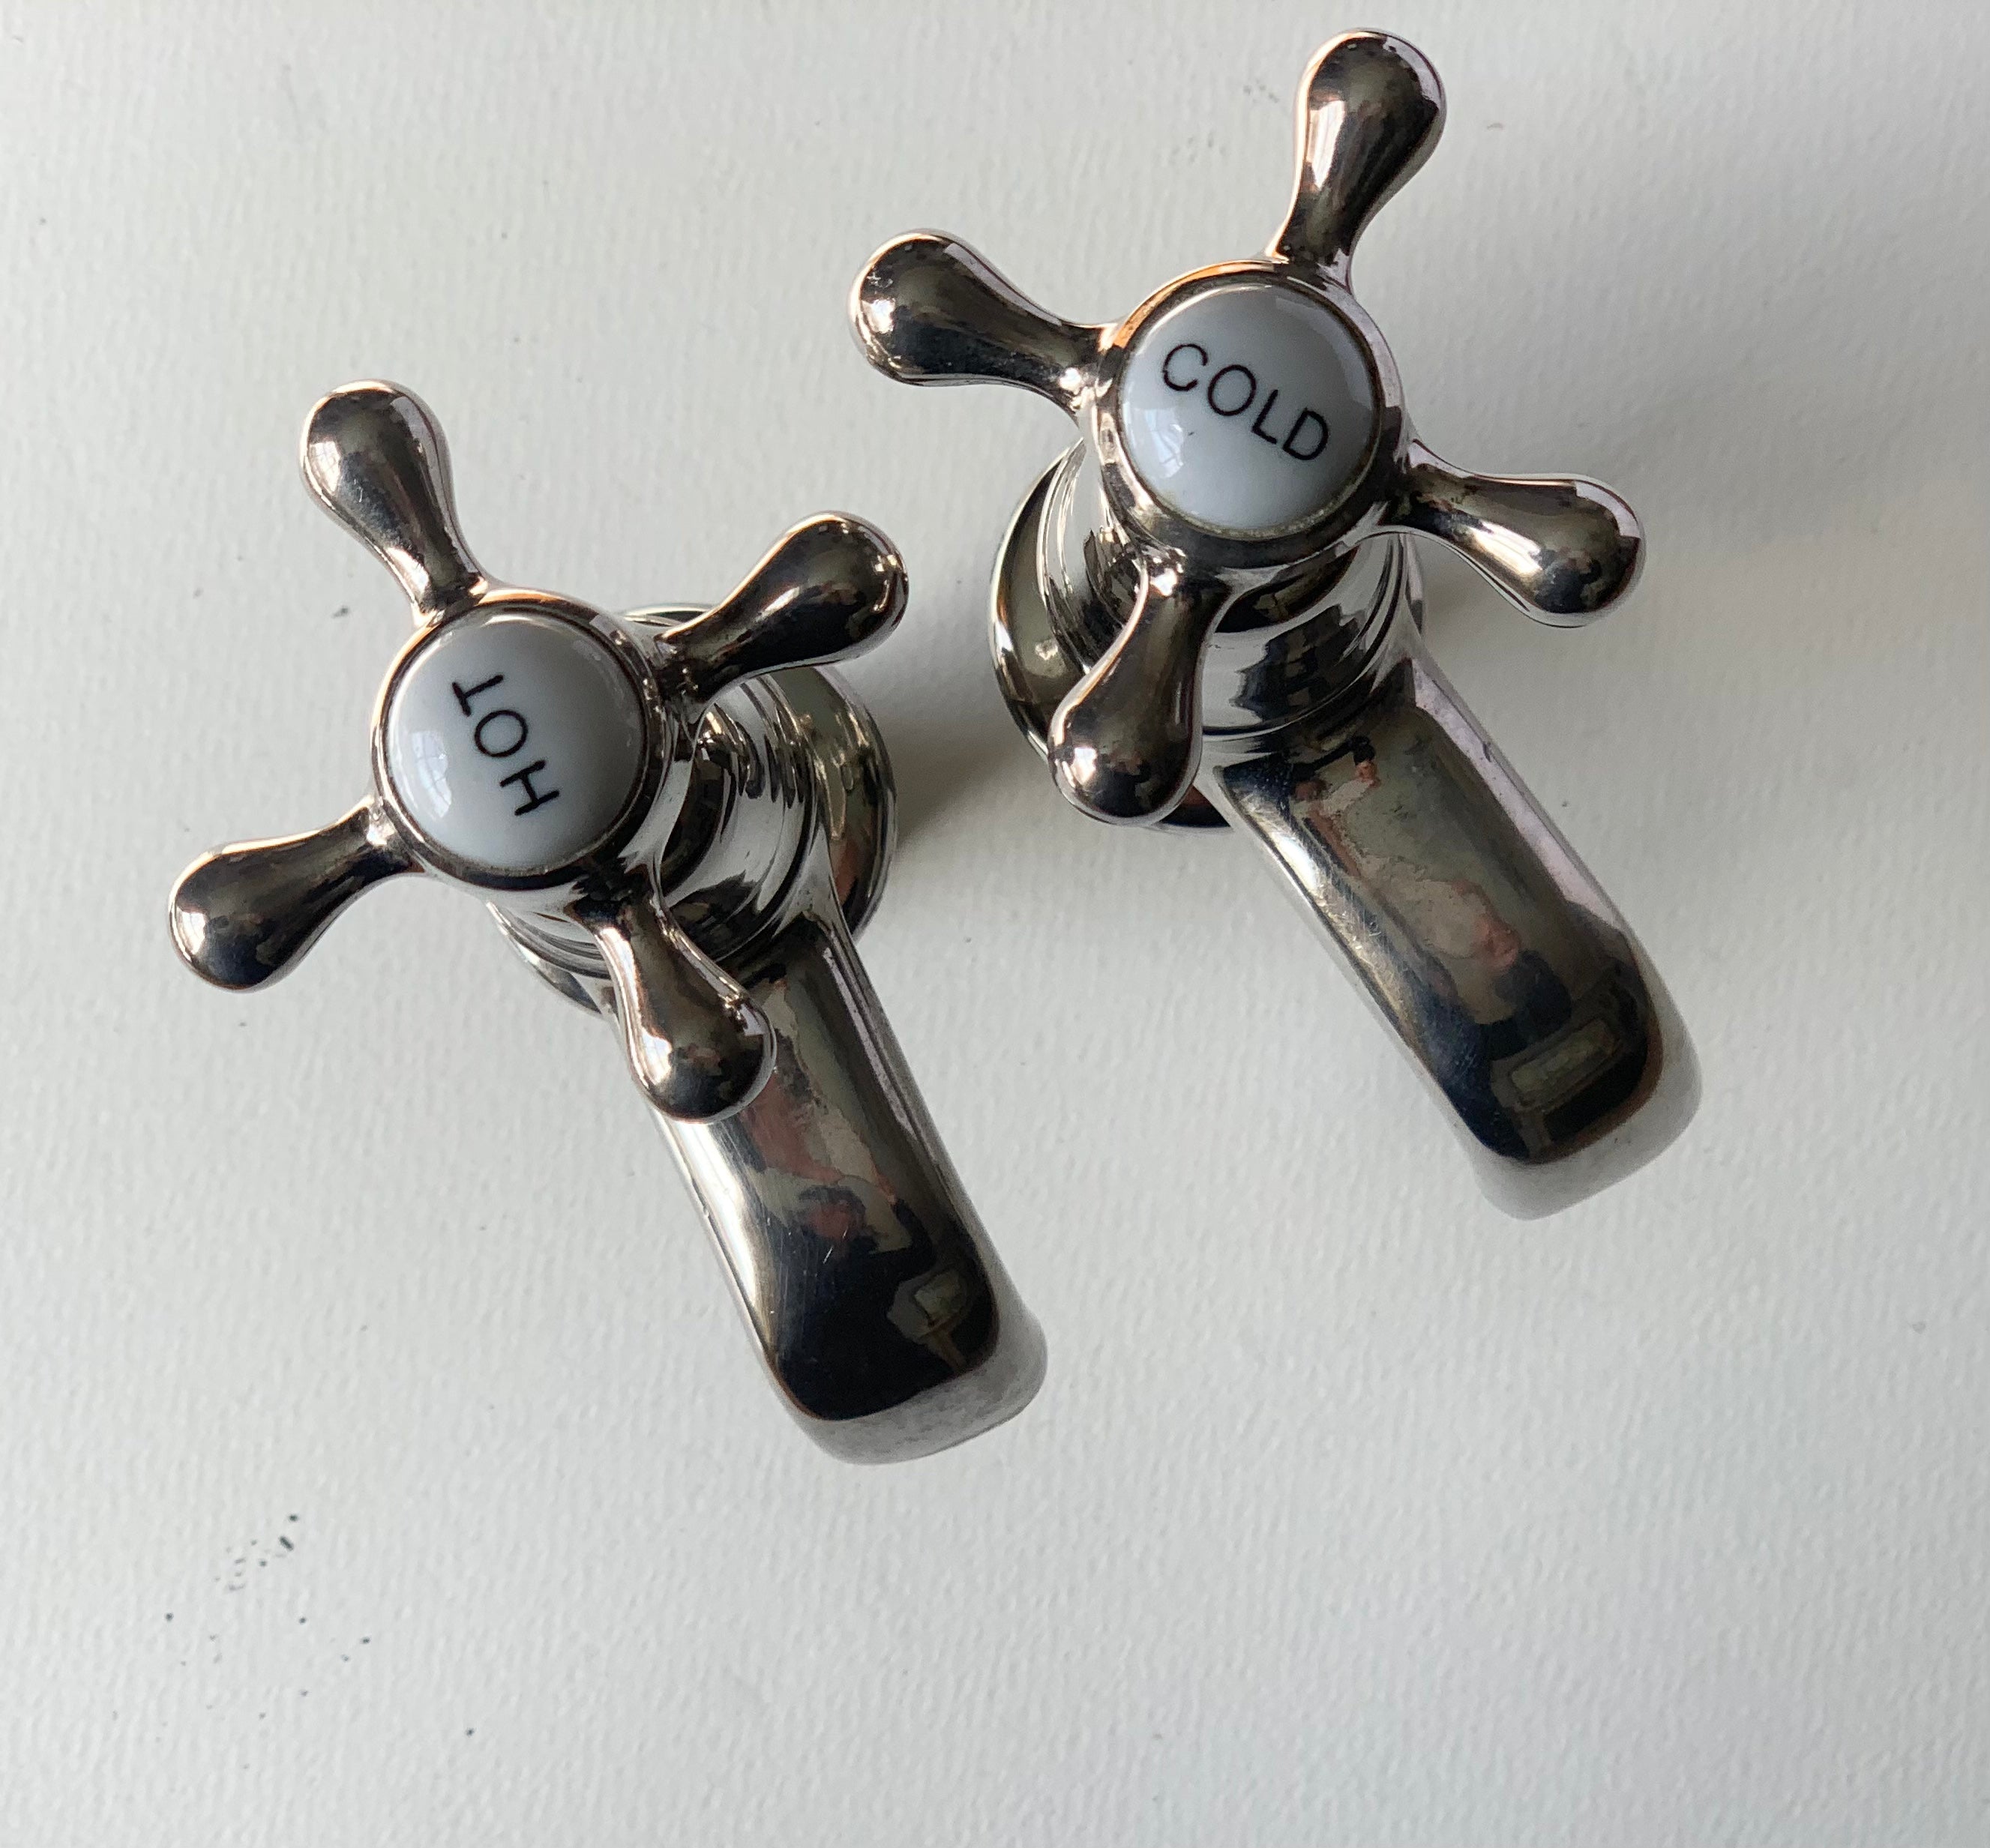 Pair of Antique Basin Taps with owl mark